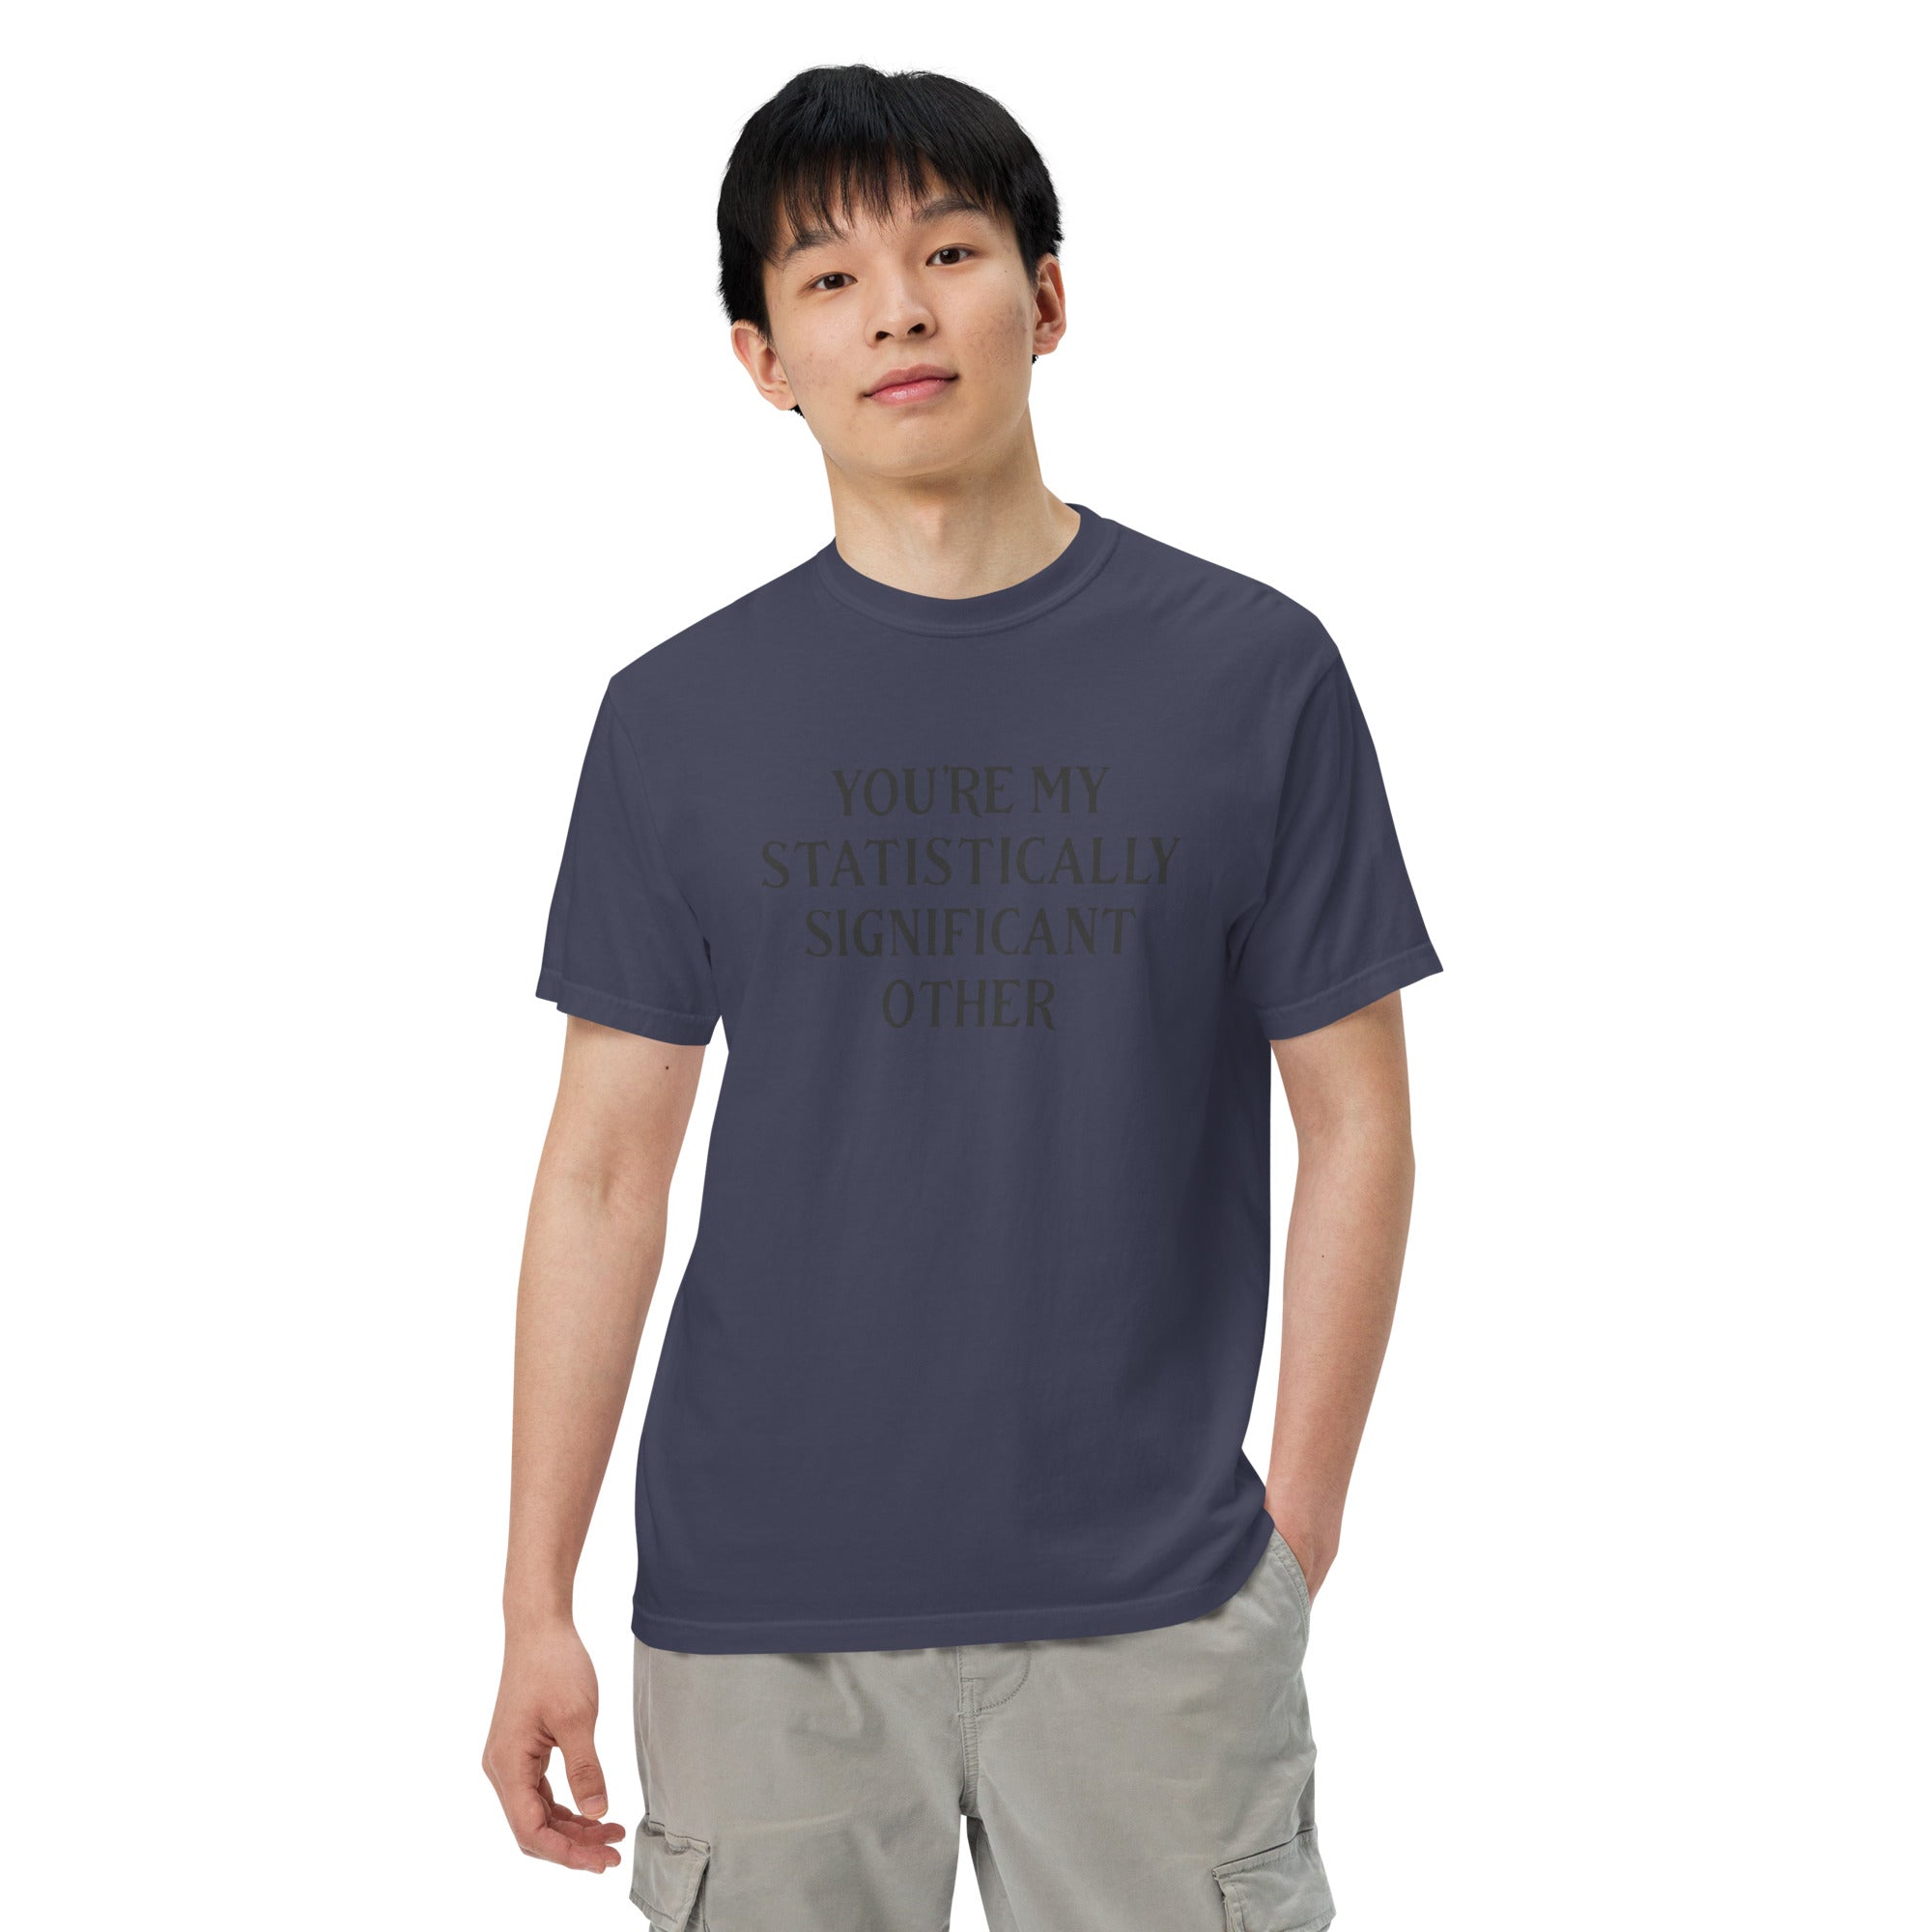 You're my statistically significant other Men’s garment-dyed heavyweight t-shirt